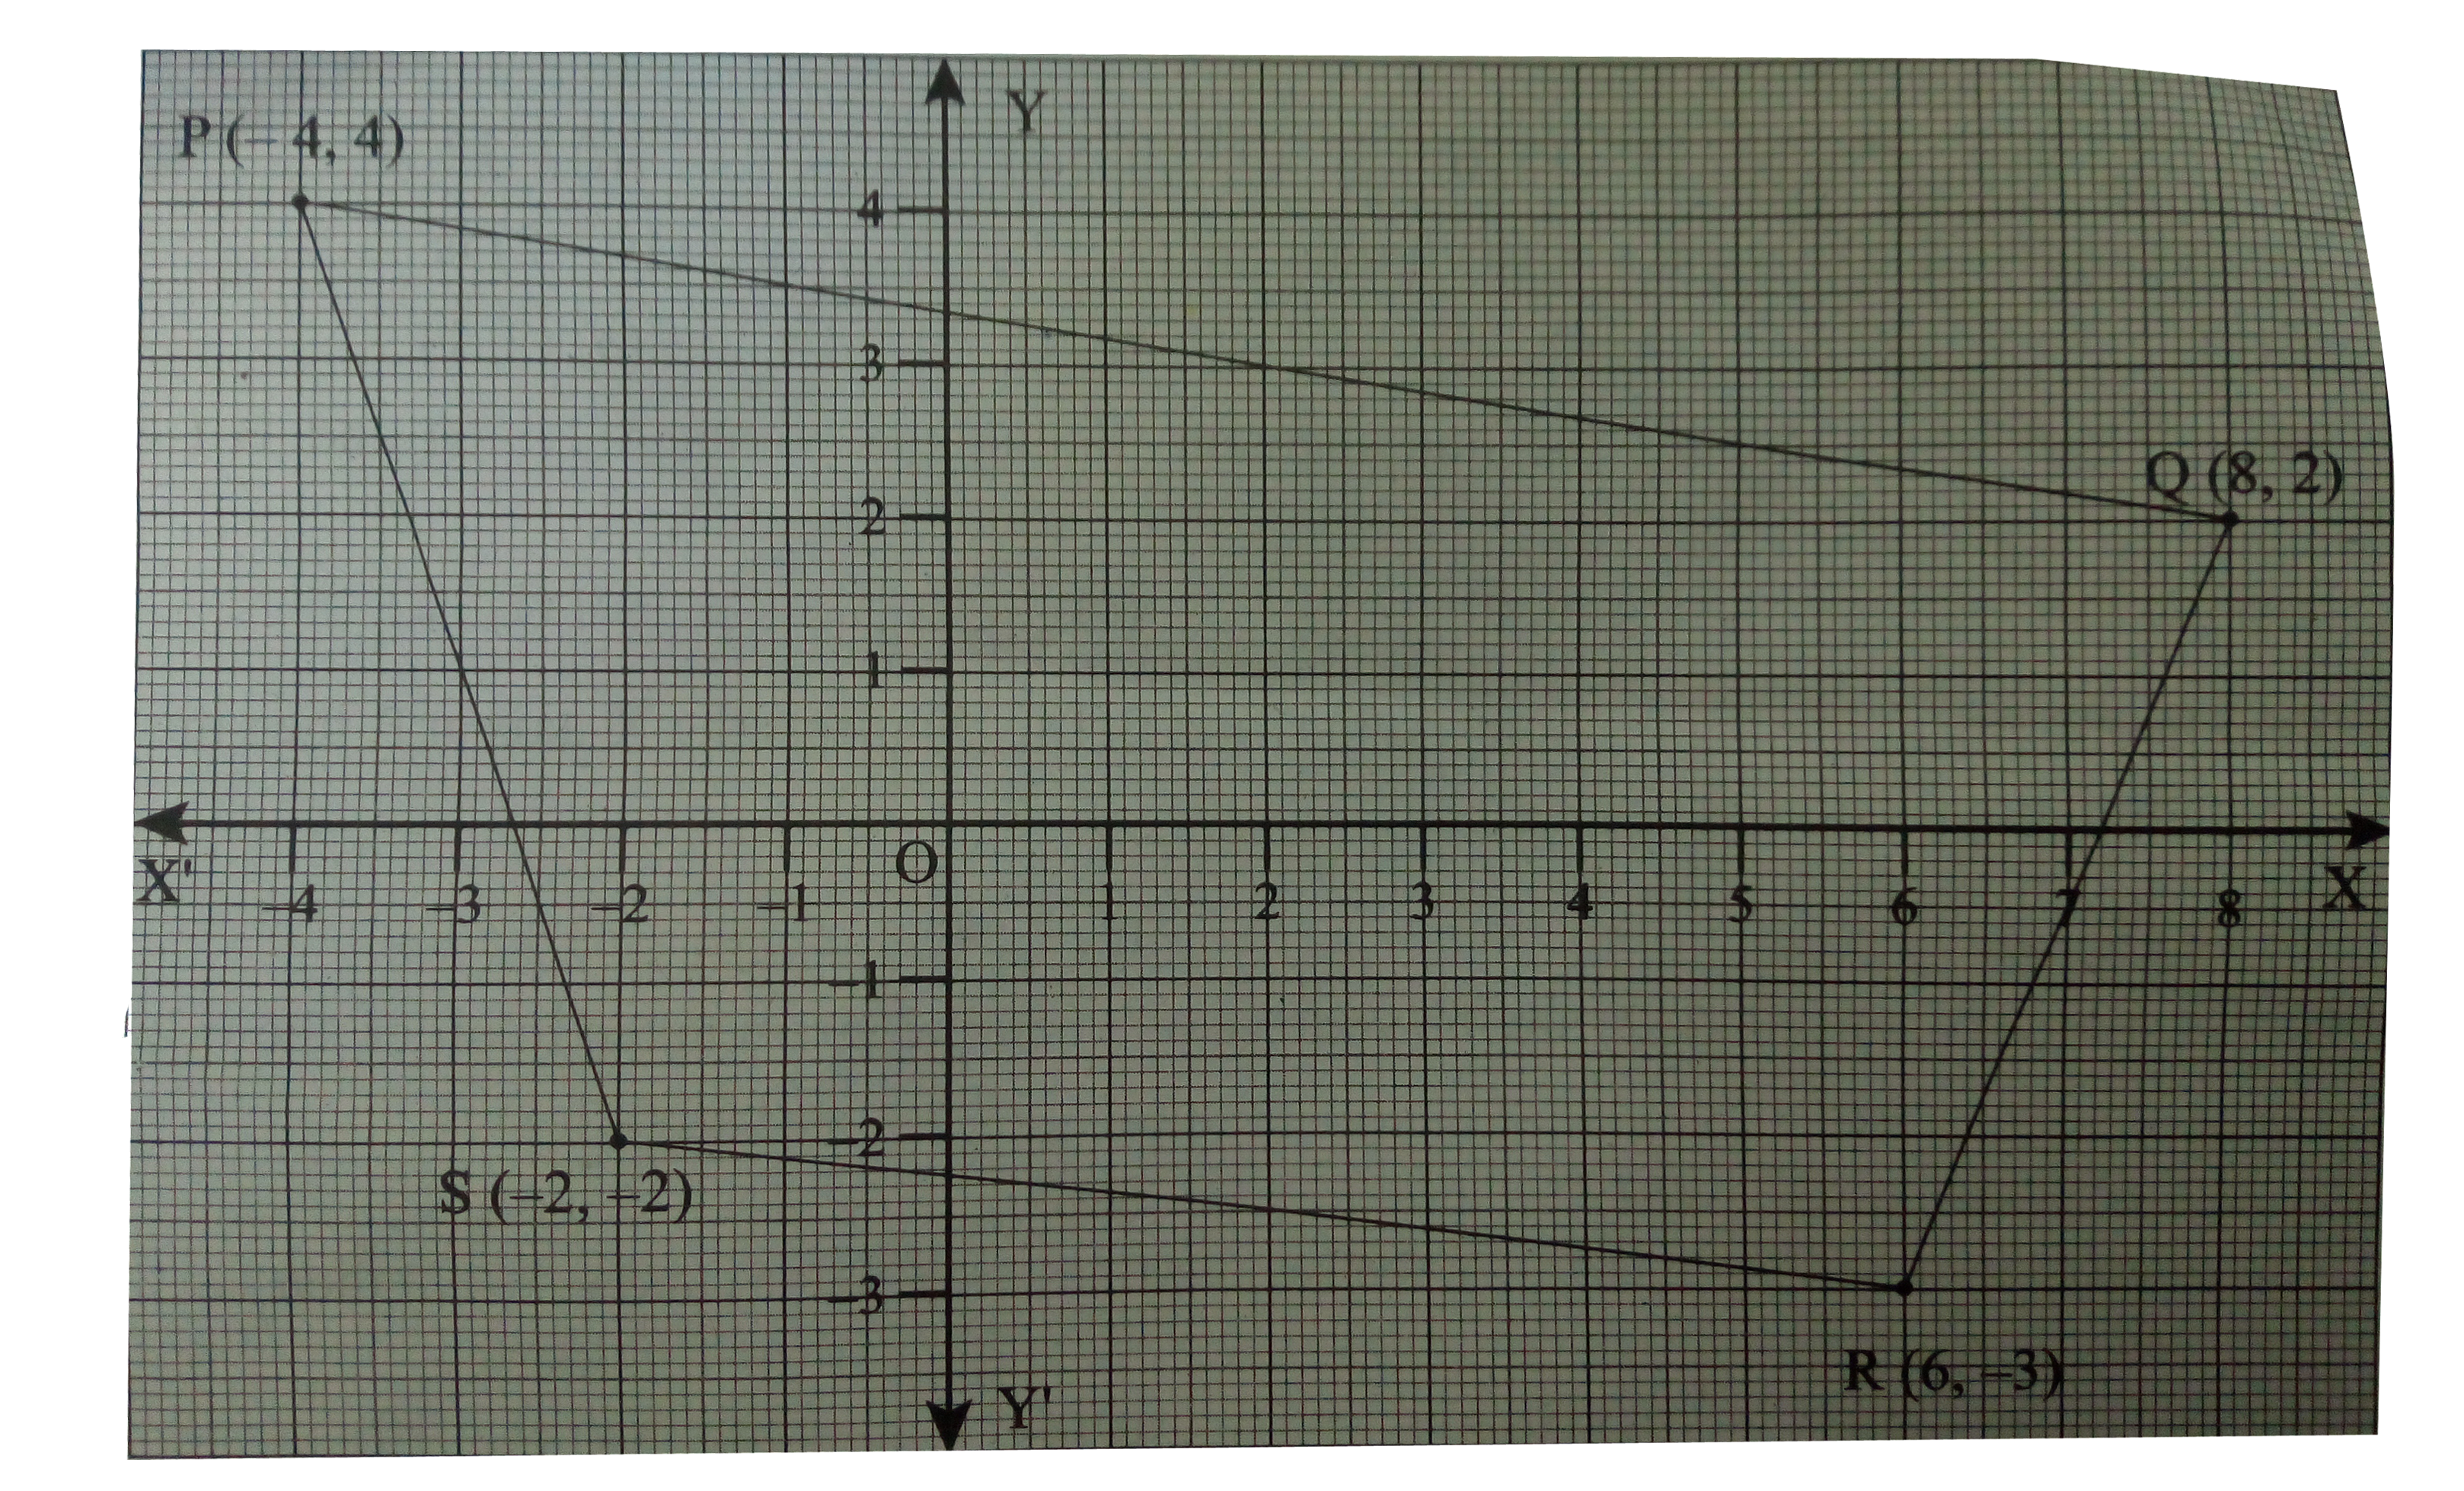 Write the coordinates of quadrilateral PQRs as shown in the following figure.